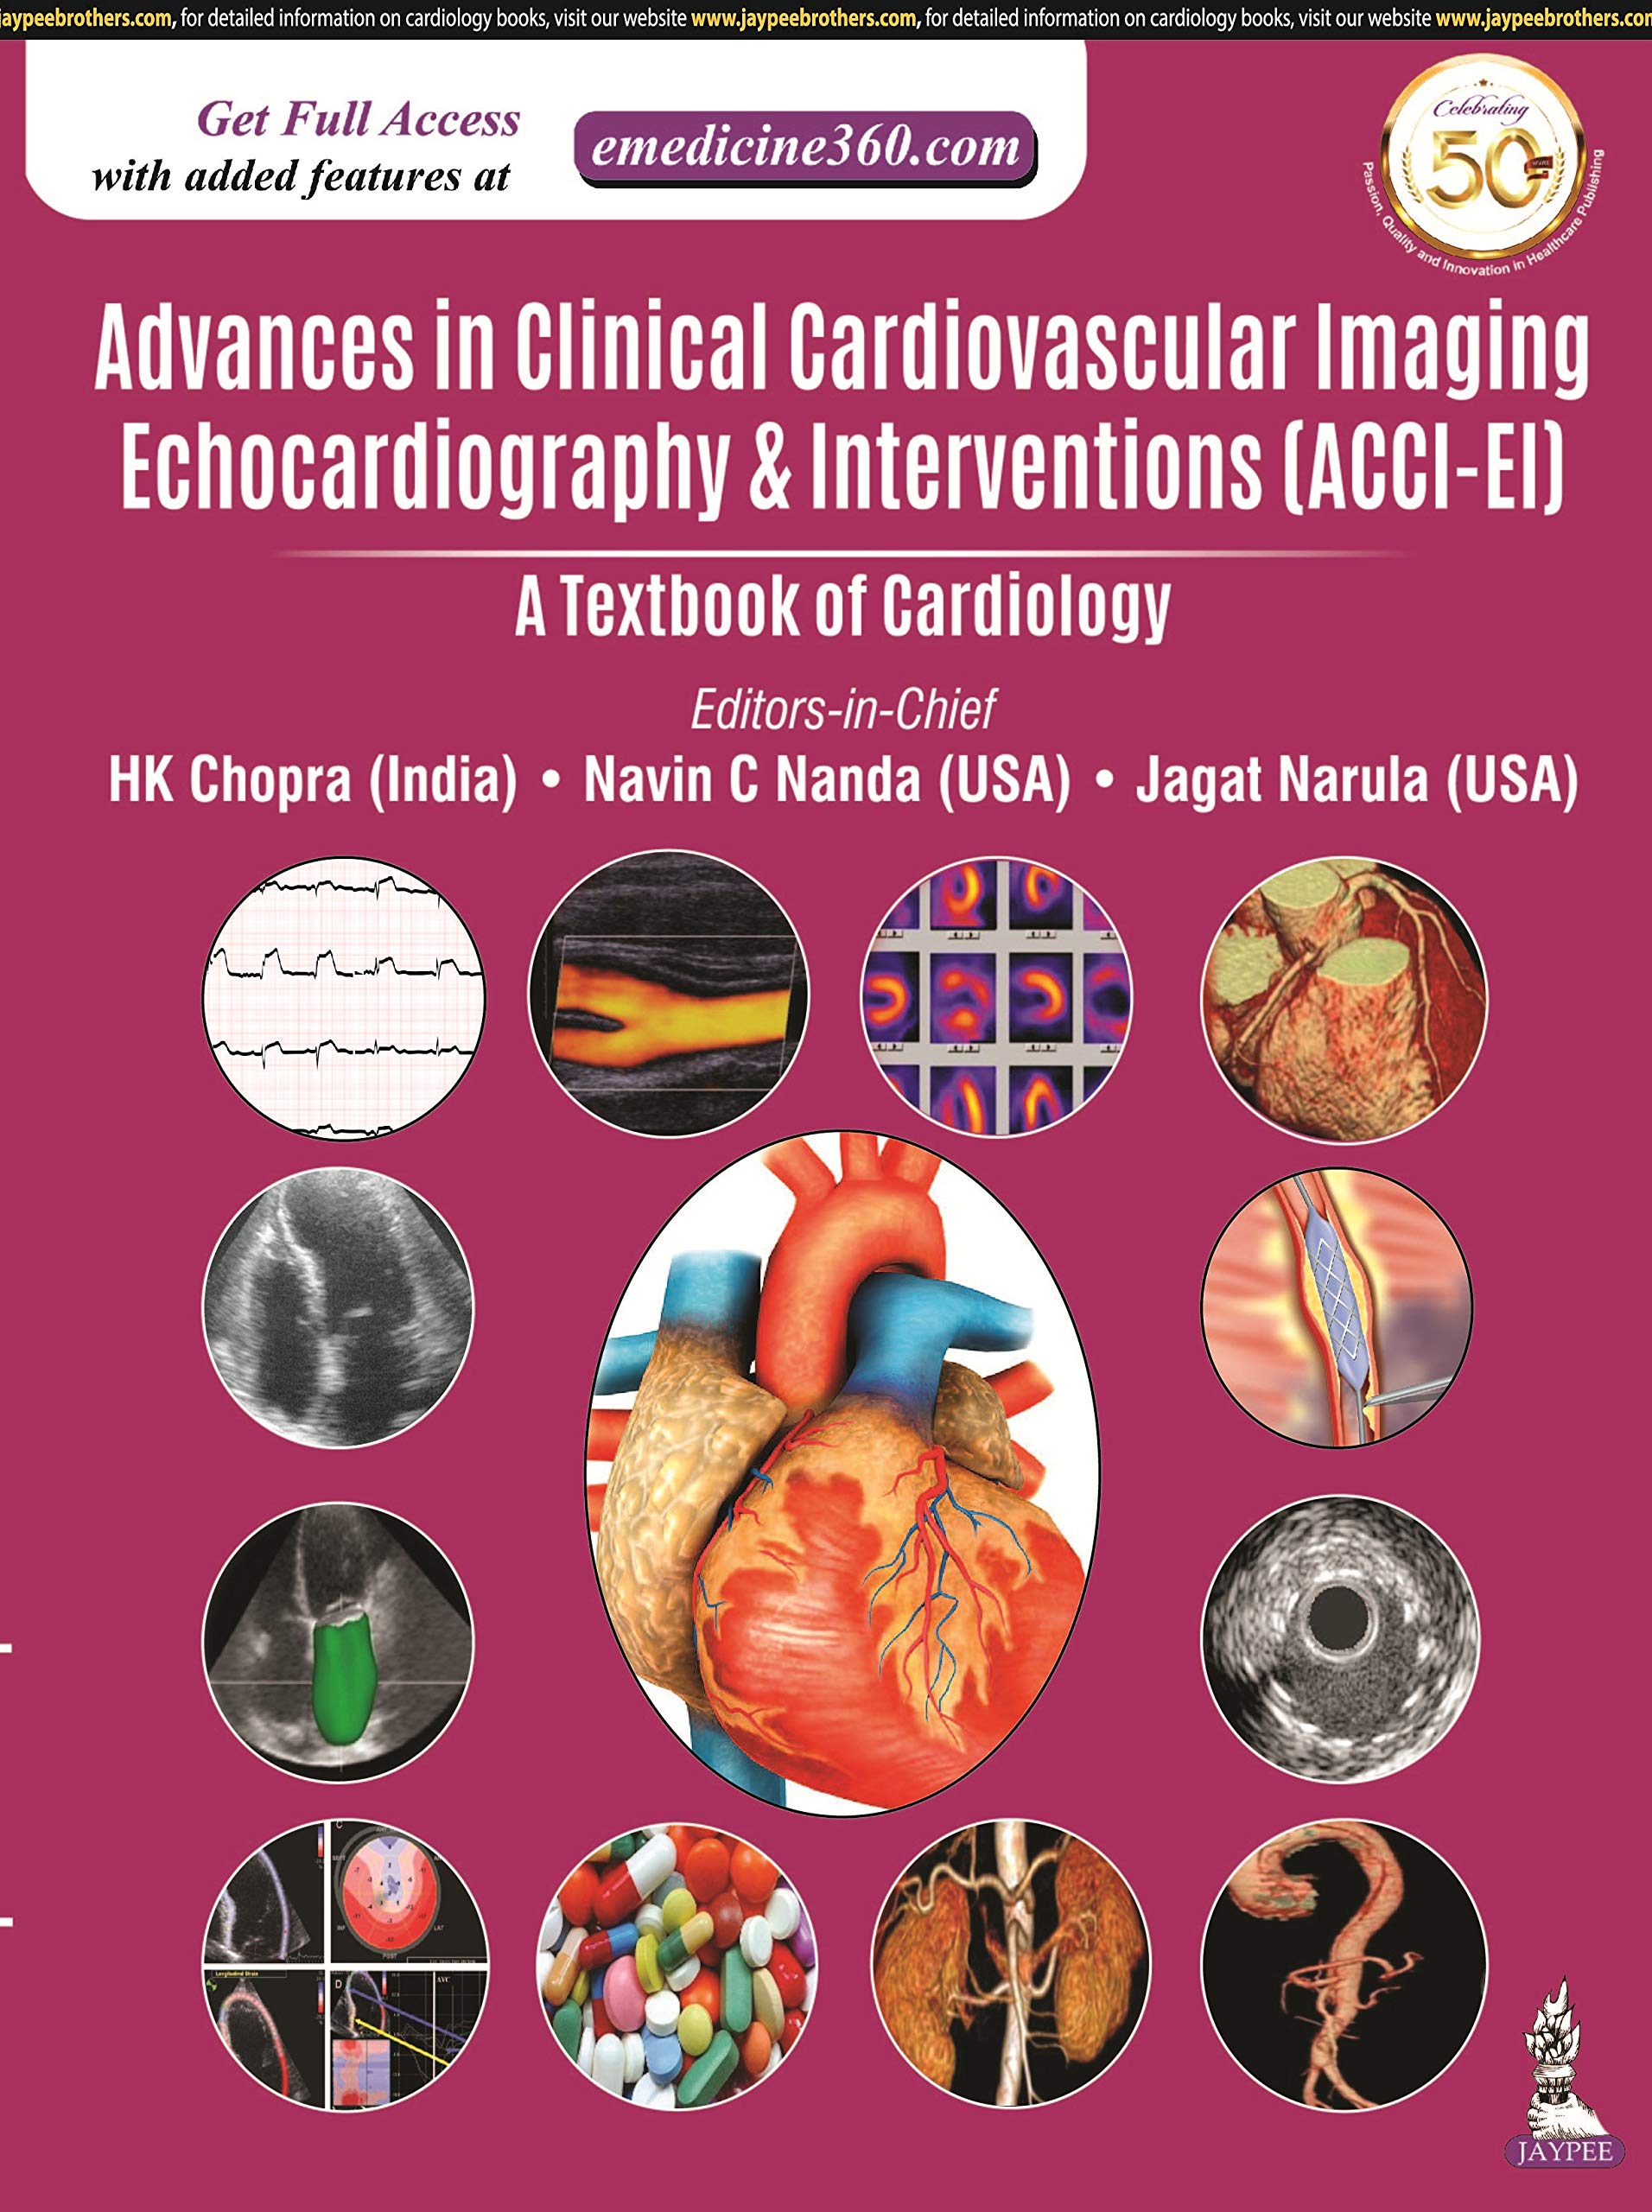 Advances In Clinical Cardiovascular Imaging Echocardiography & Interventions (Acci-Ei)